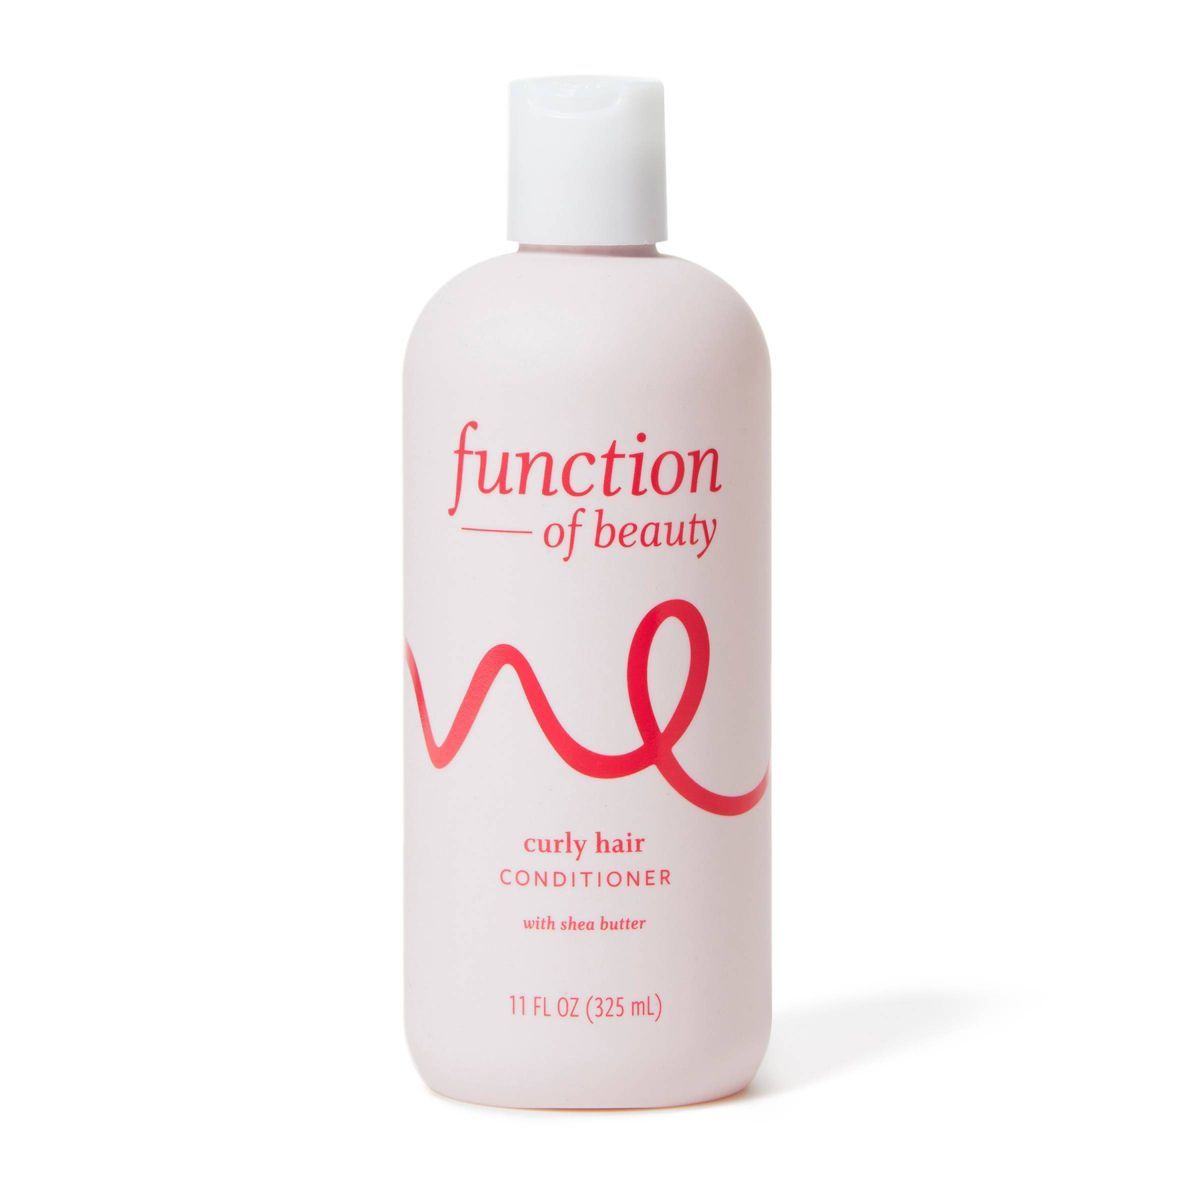 Function of Beauty Custom Curly Hair Conditioner Base with Shea Butter - 11 fl oz | Target